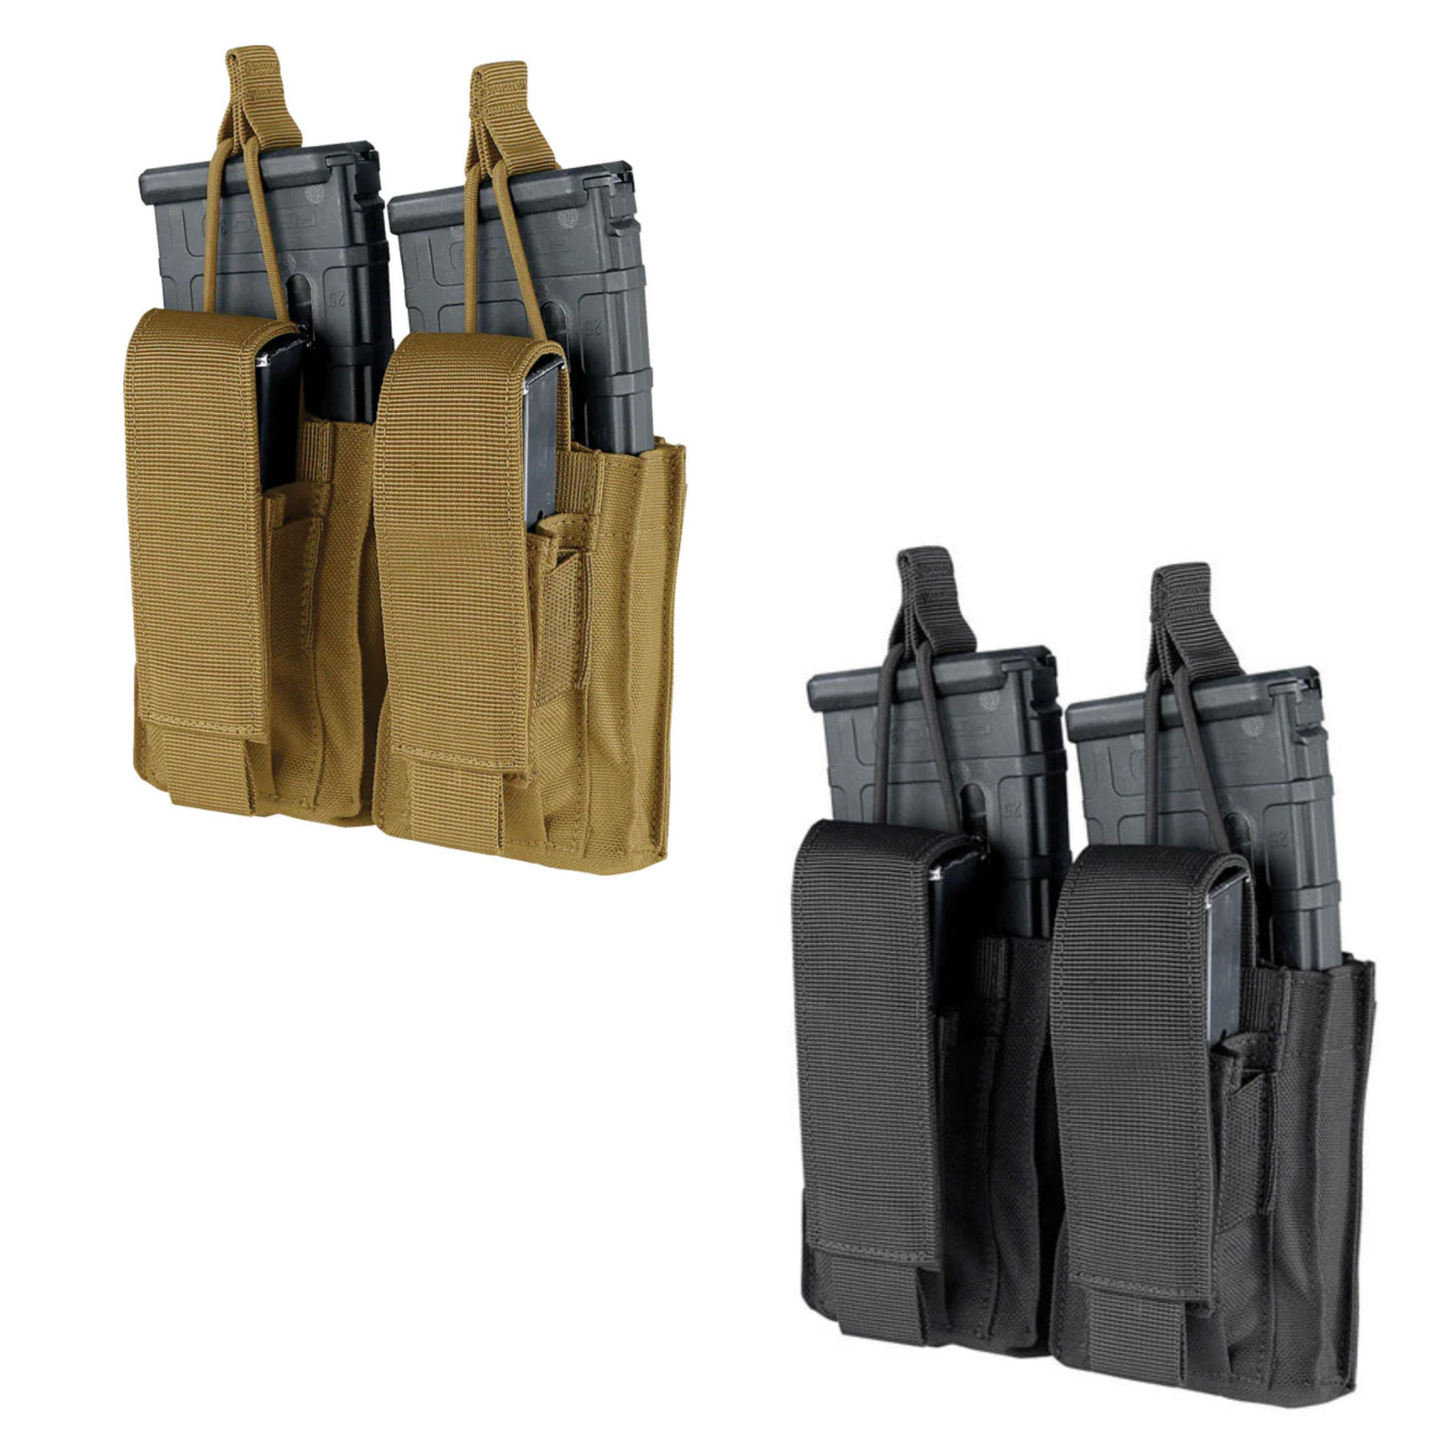 Mollé Kangaroo Mag Pouch for M4/ Pistol Magazines